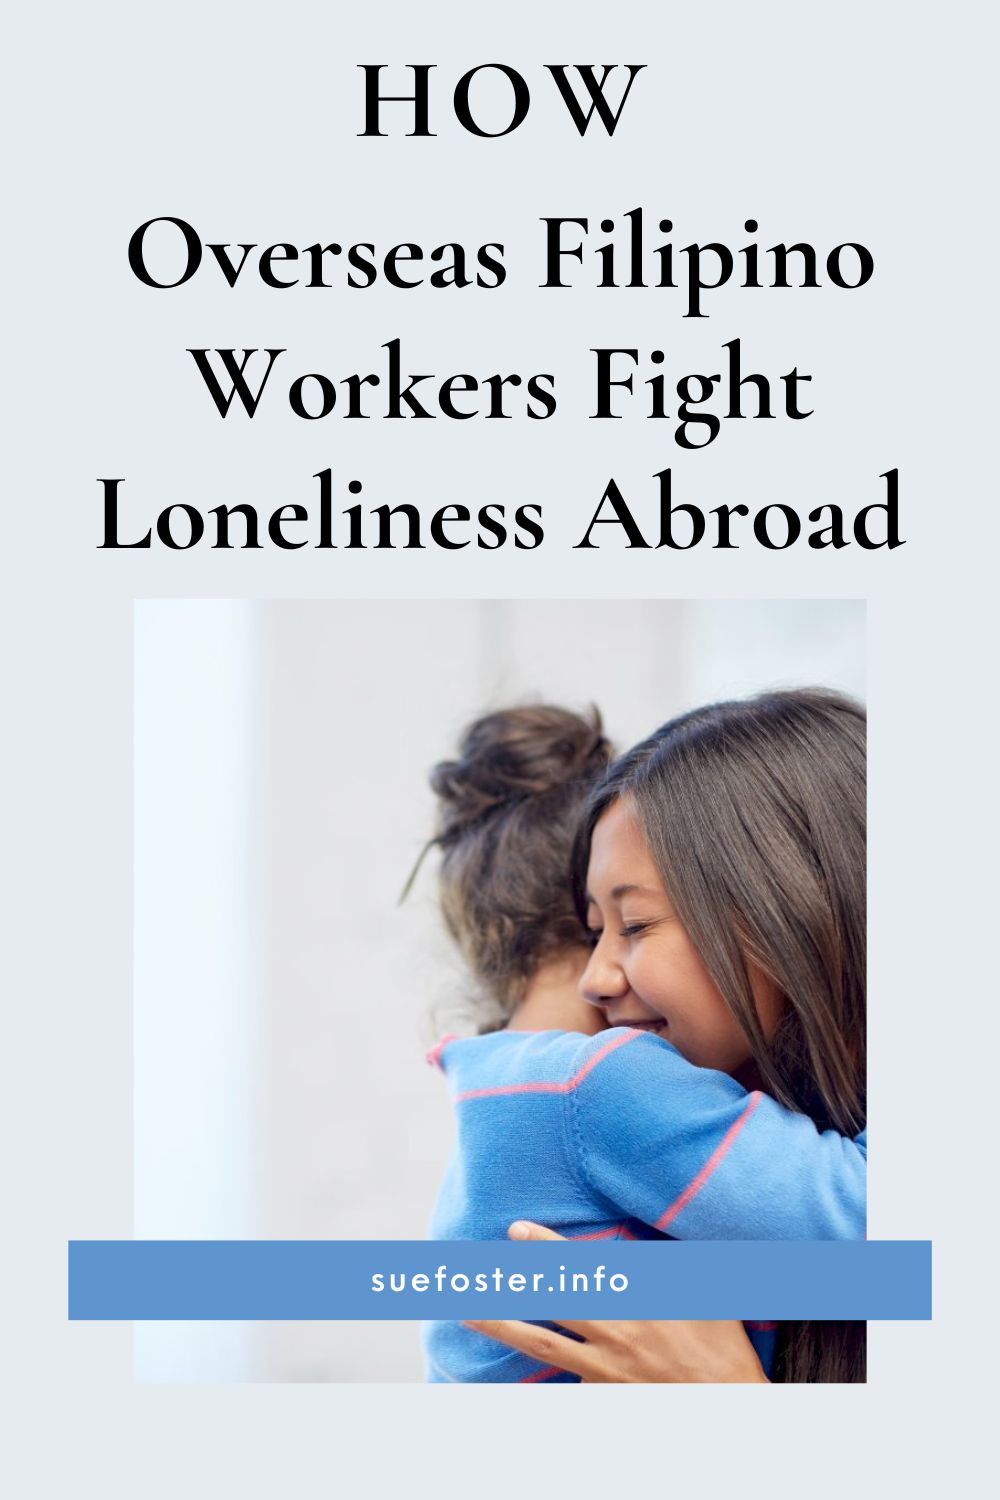 It’s not easy to be away from home for so long, and OFWs often experience loneliness during their time abroad. How do they fight the sadness? 